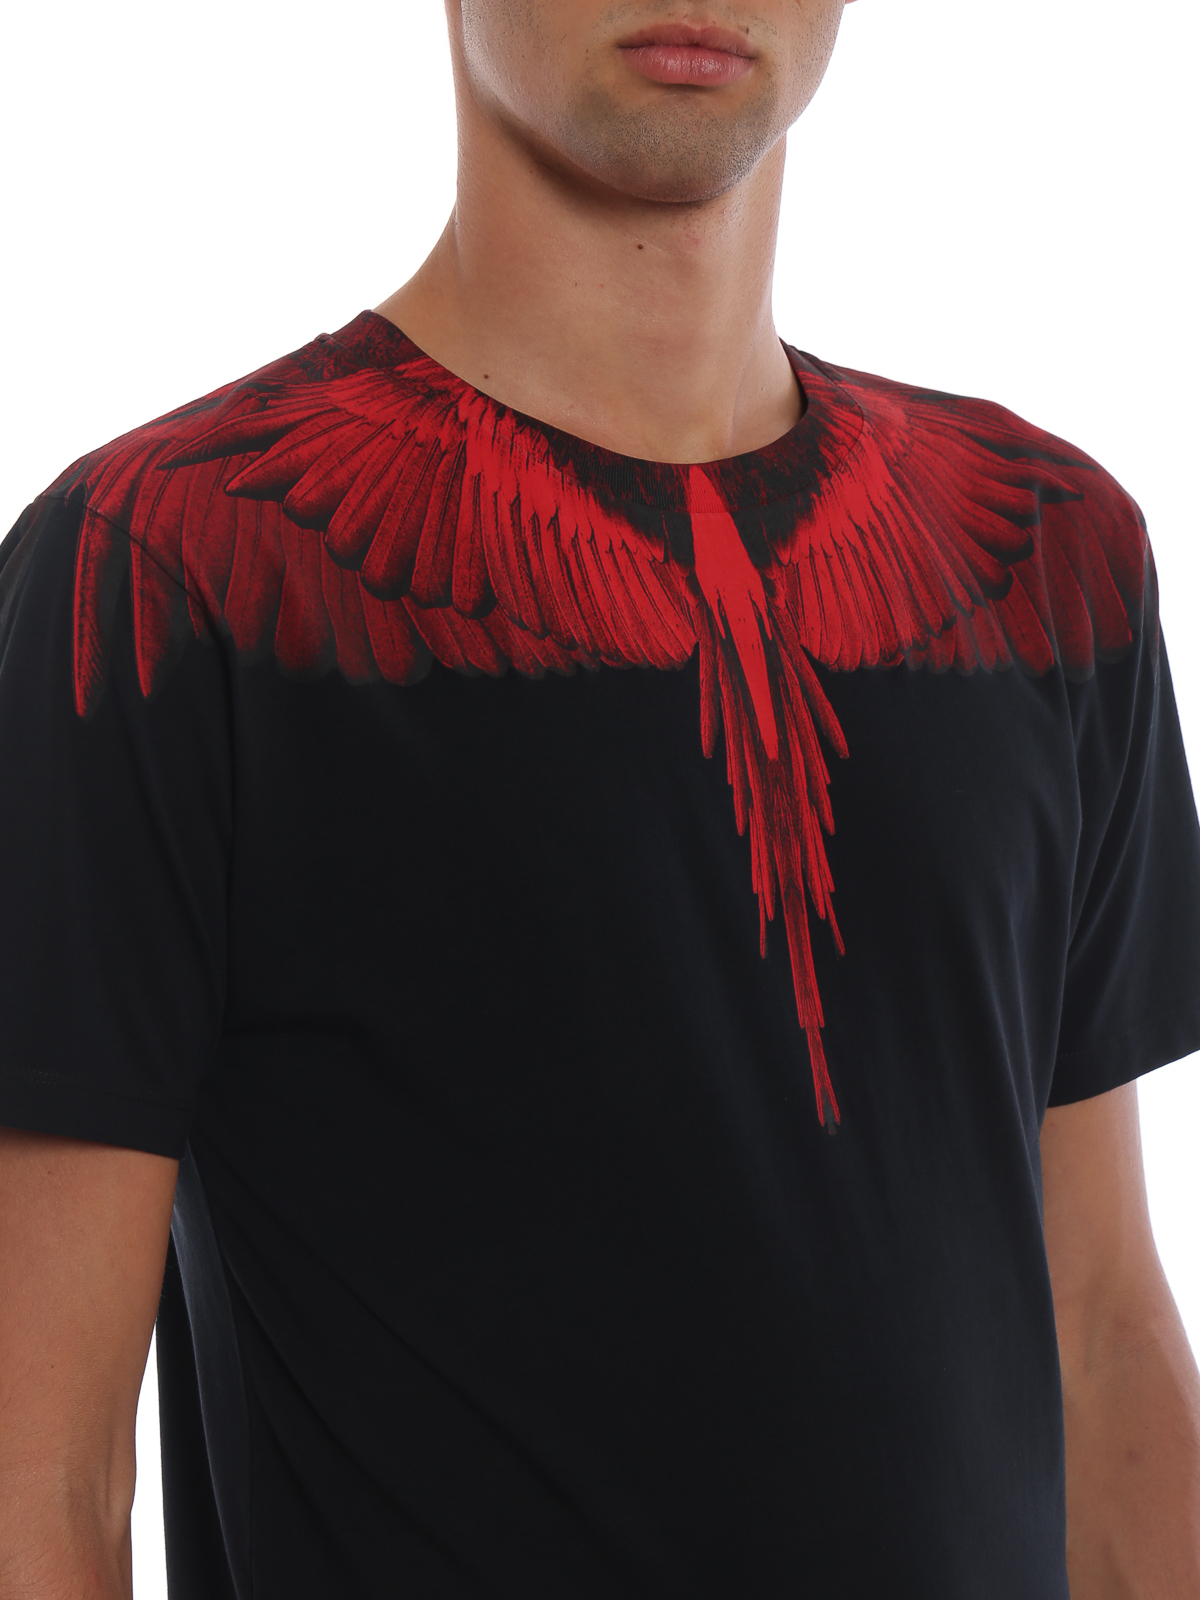 black t shirt with red print